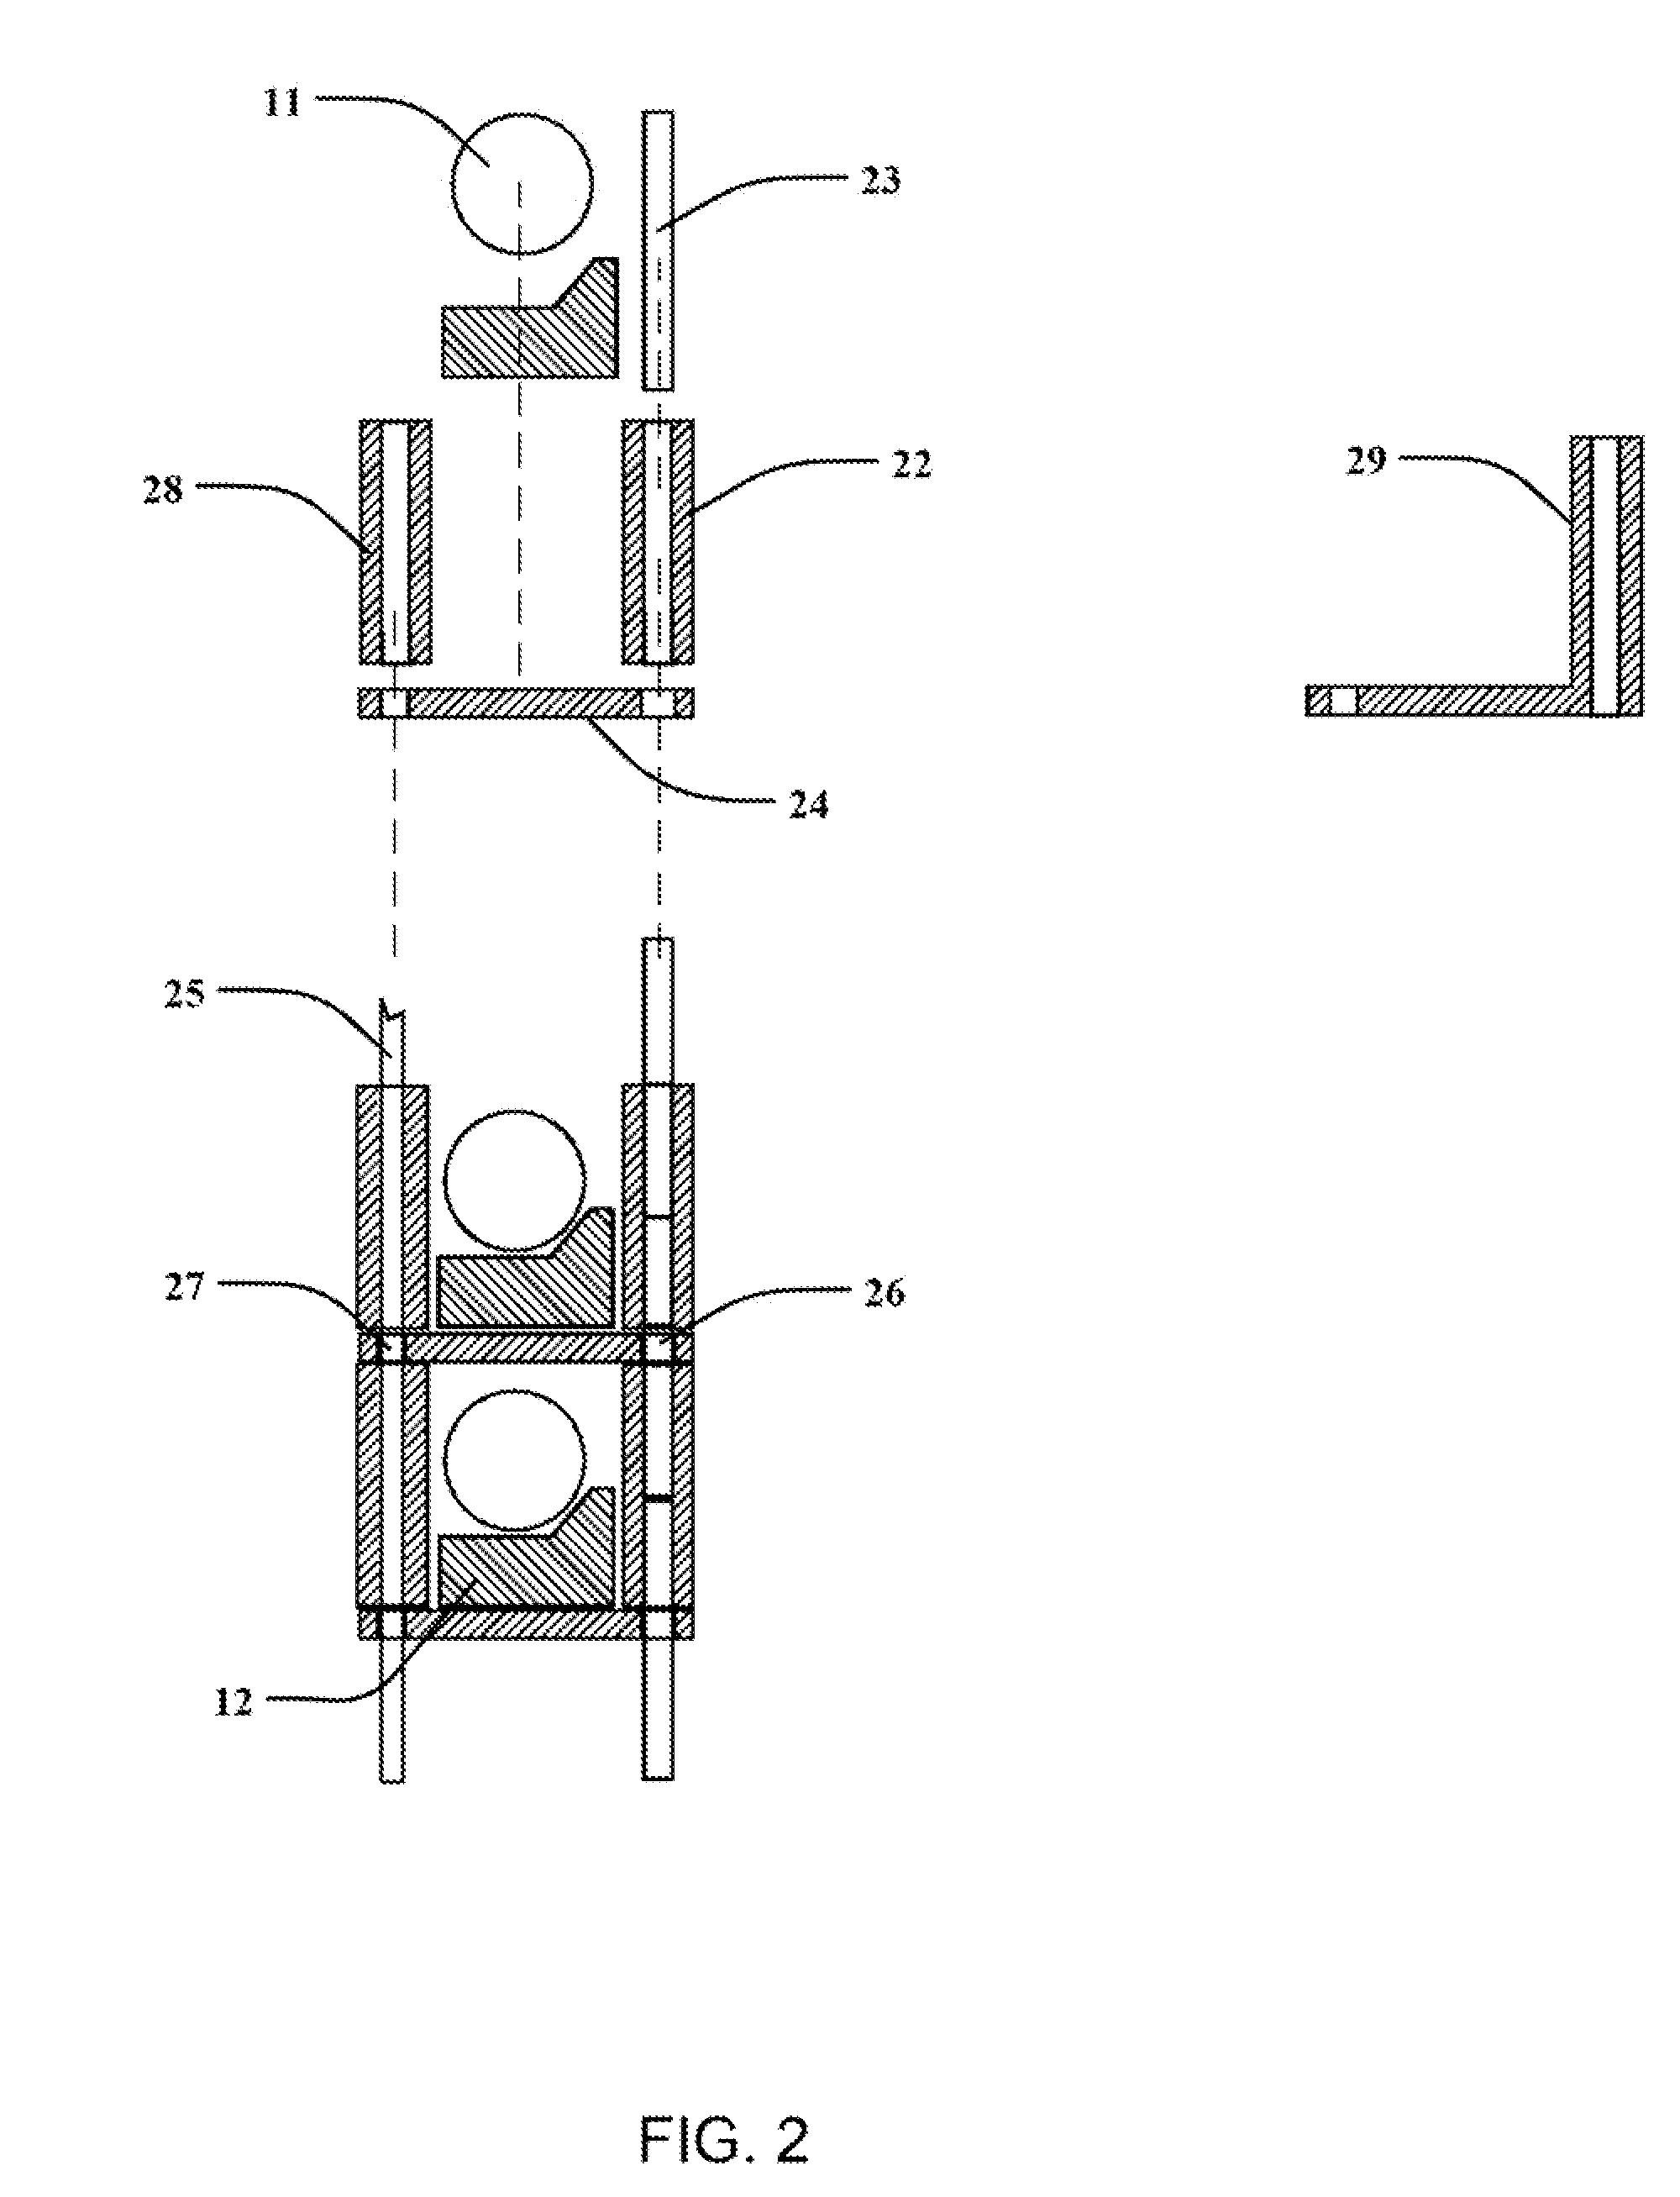 Thermal processing apparatus with optimized structural support mechanism